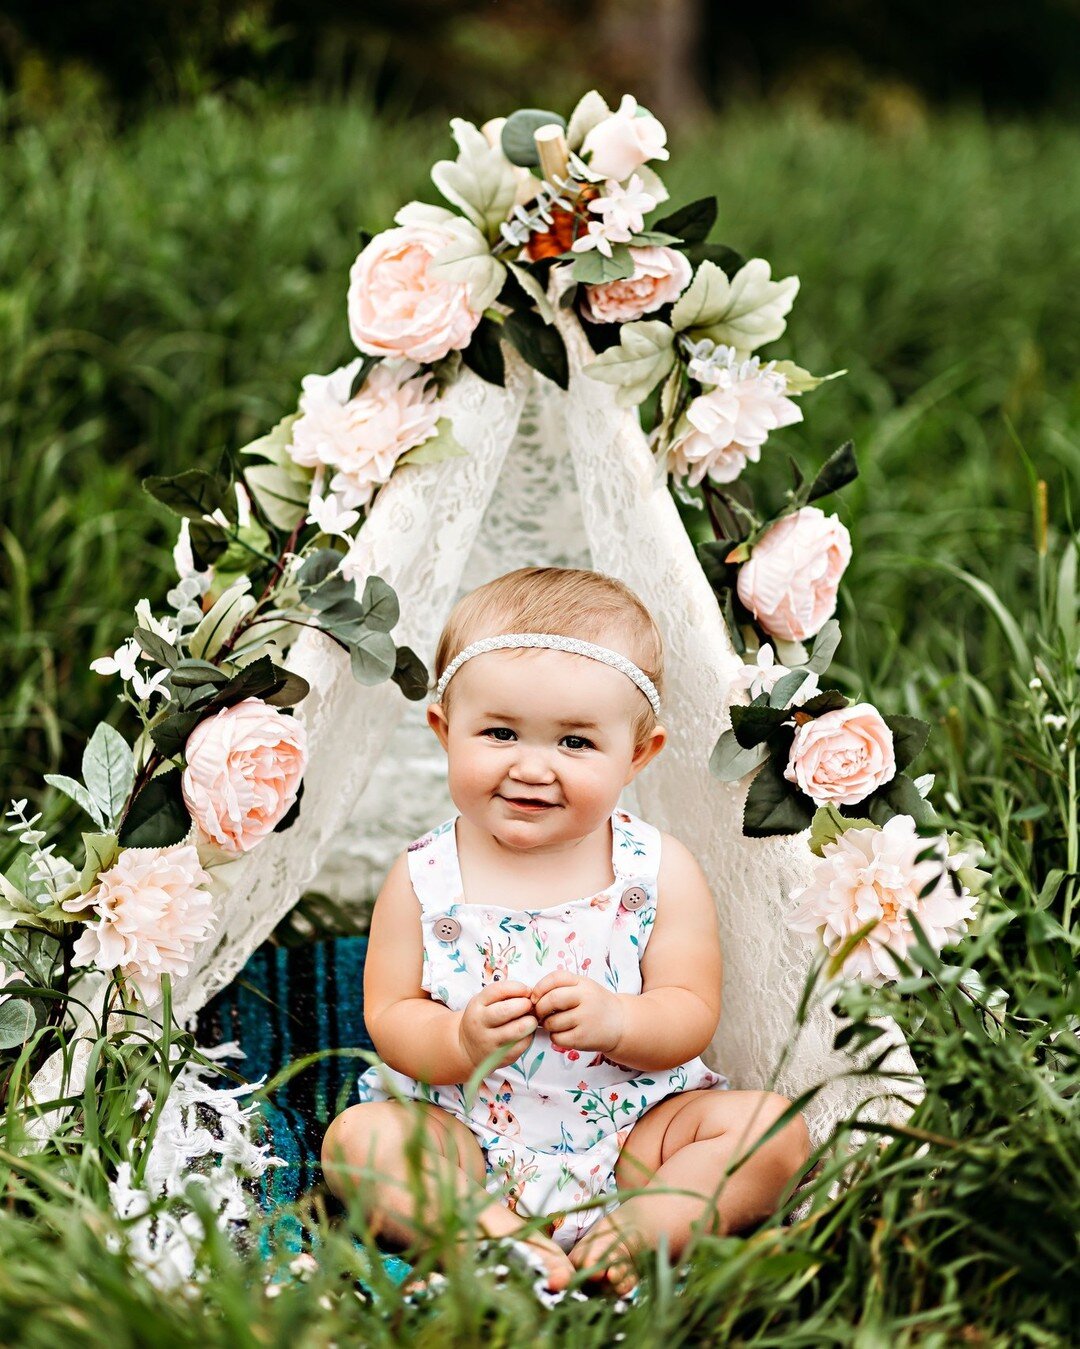 Miss Lyndy spent her birthday doing her 1 year photo session &amp; look at how stinkin' cute she is! 🥺 I can't believe you are one already sweet girl, it's been so fun watching you grow!

#oneyearphotos #seymourflashphotography #dubuqueiowa #iowapho